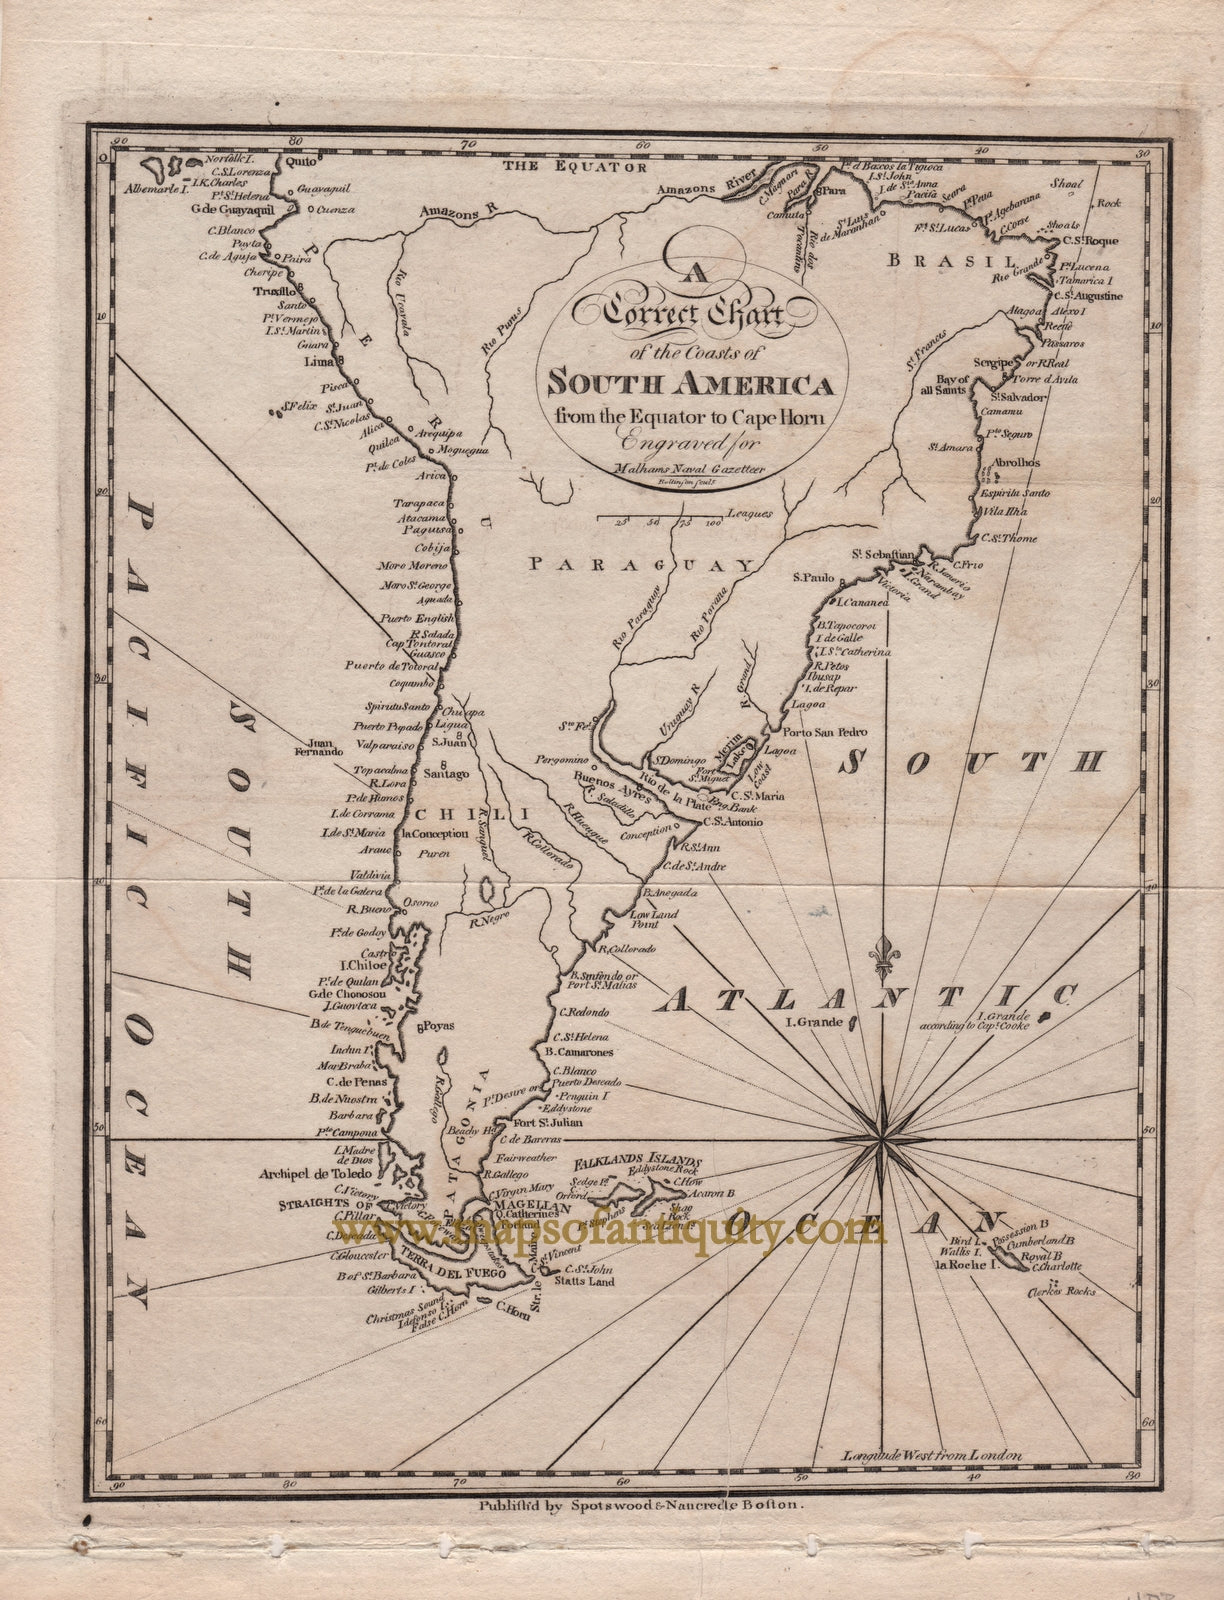 Black-and-White-Antique-Map-A-Correct-Chart-of-the-Coasts-of-South-America-from-the-Equator-to-Cape-Horn-South-America--1779-Malham's-Naval-Gazetteer-Maps-Of-Antiquity